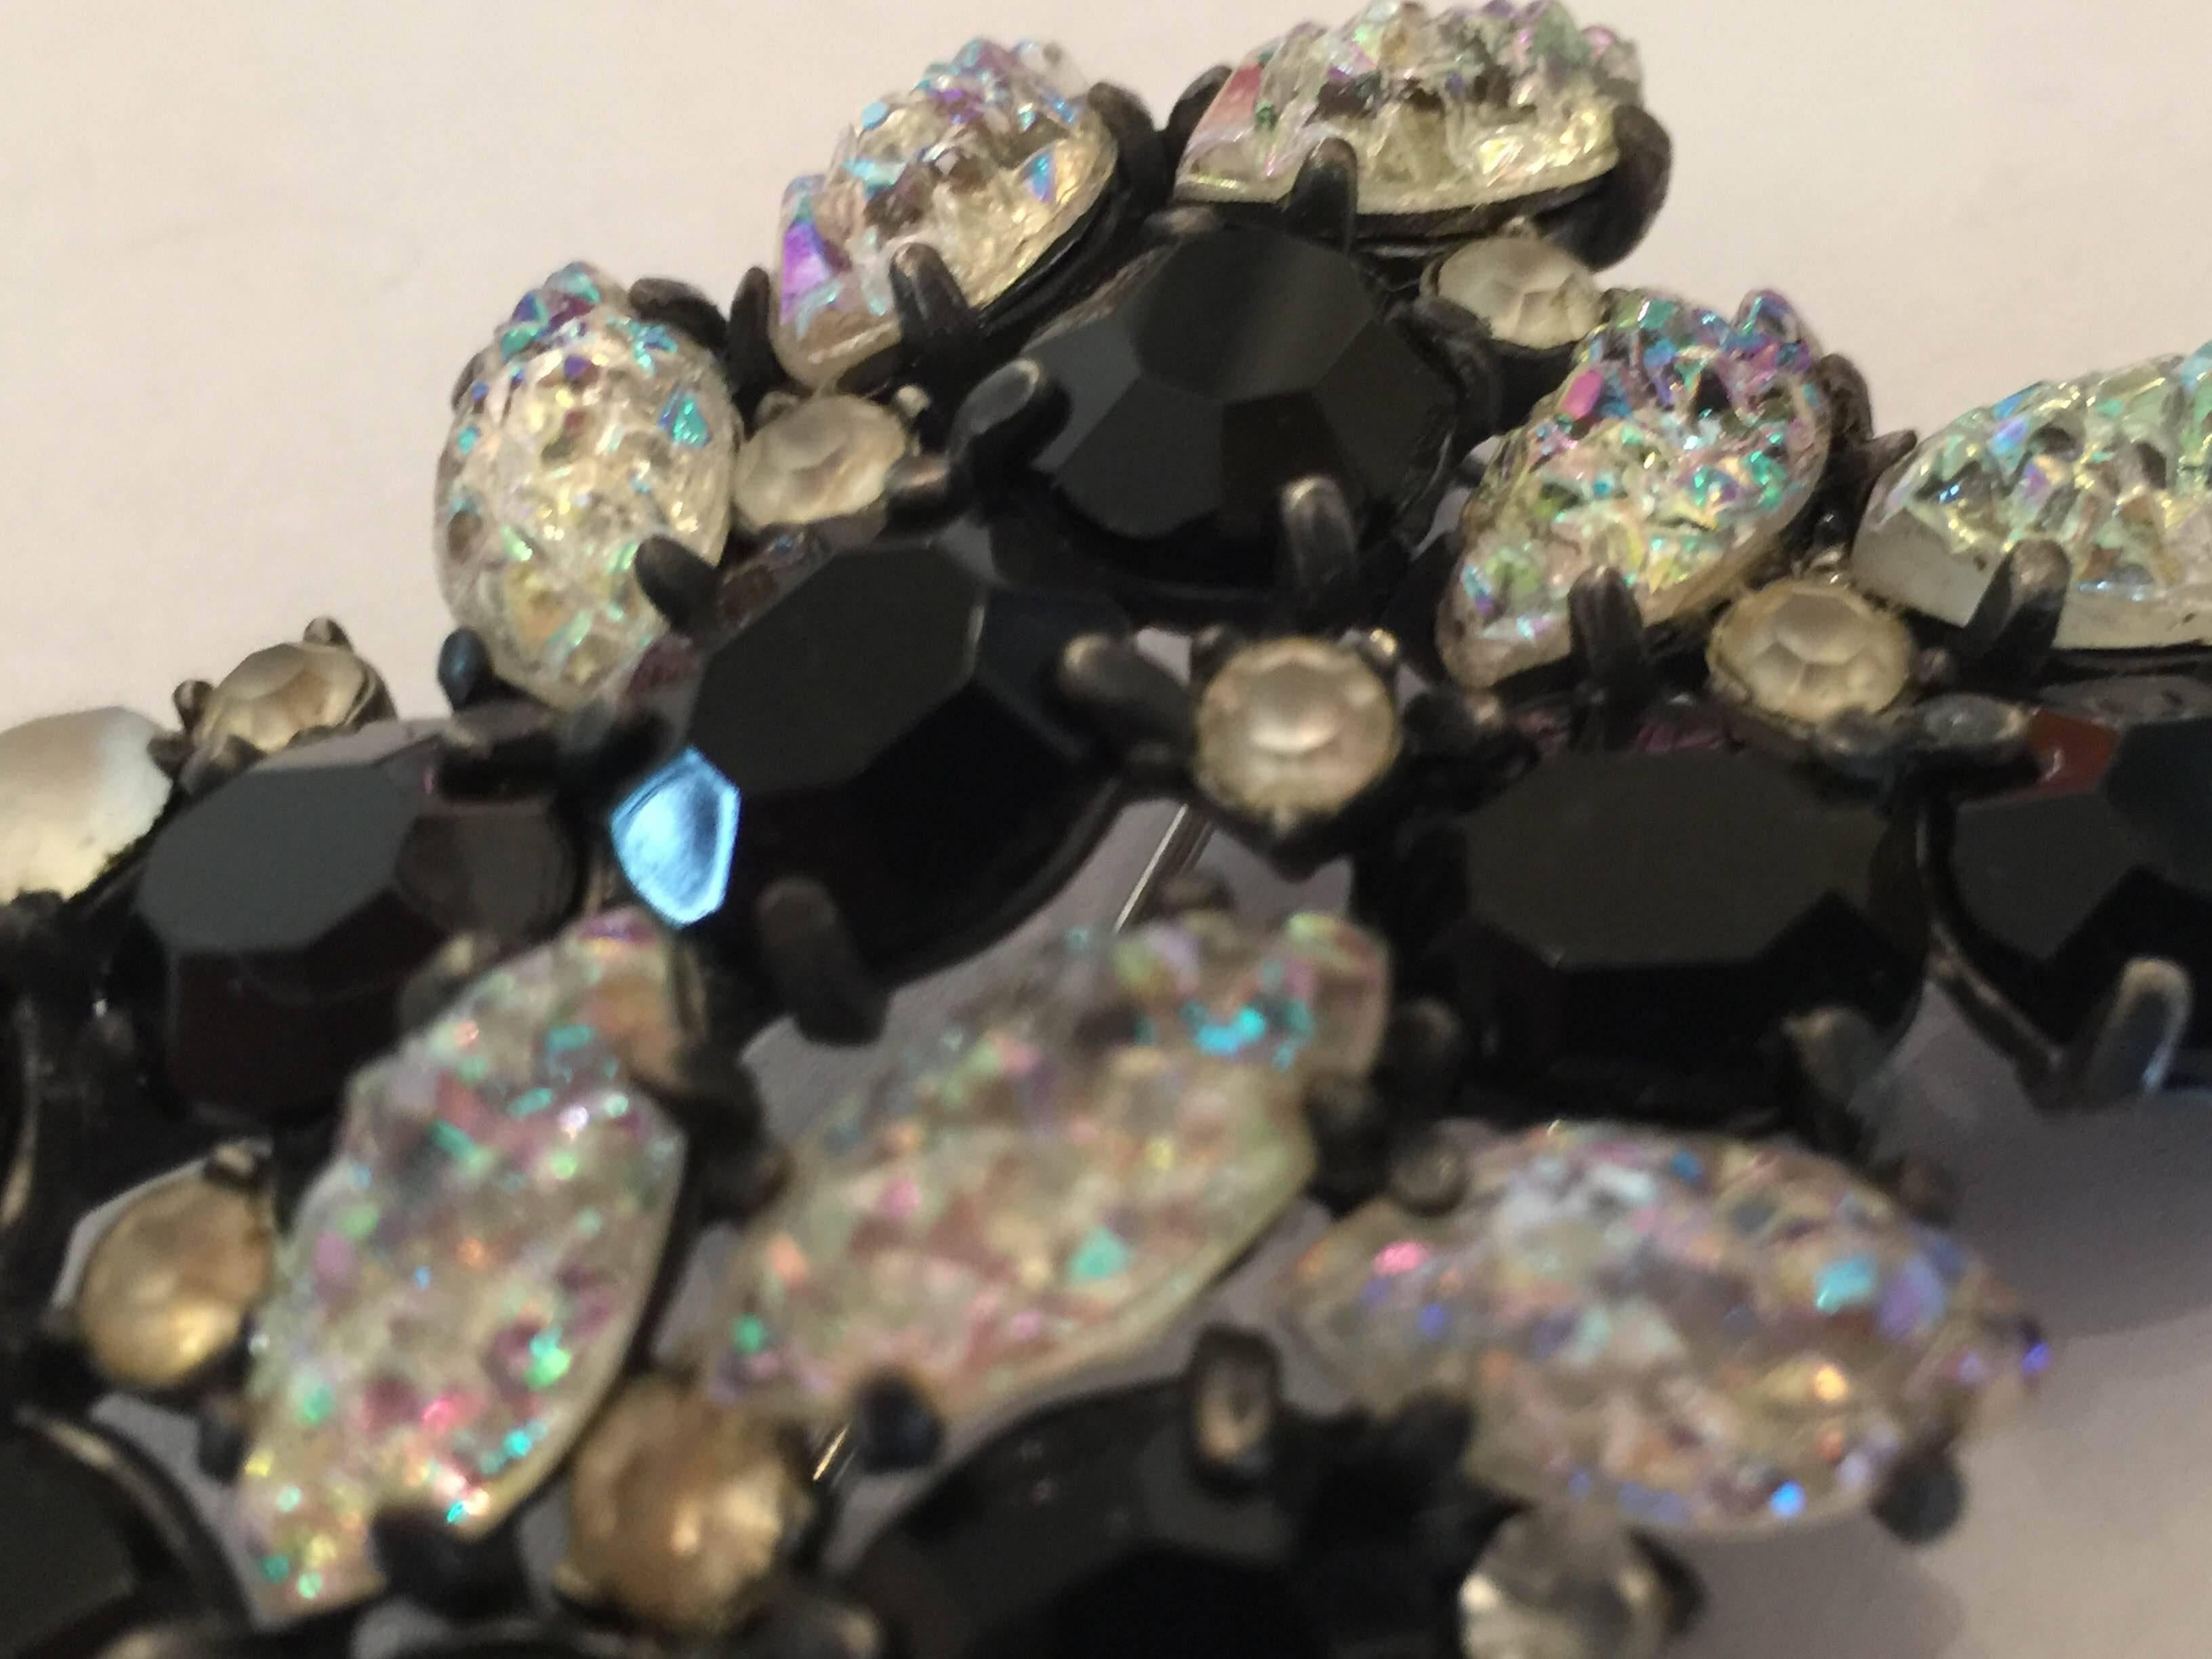 An exotic1950s SCHIAPARELLI Lava Rock Borealis and Black Brooch Pin, the exotic clear borealis lava rock stones paired with faceted jet black crystals is dramatic and impactful, indeed. A medium size pin approximately 2.25